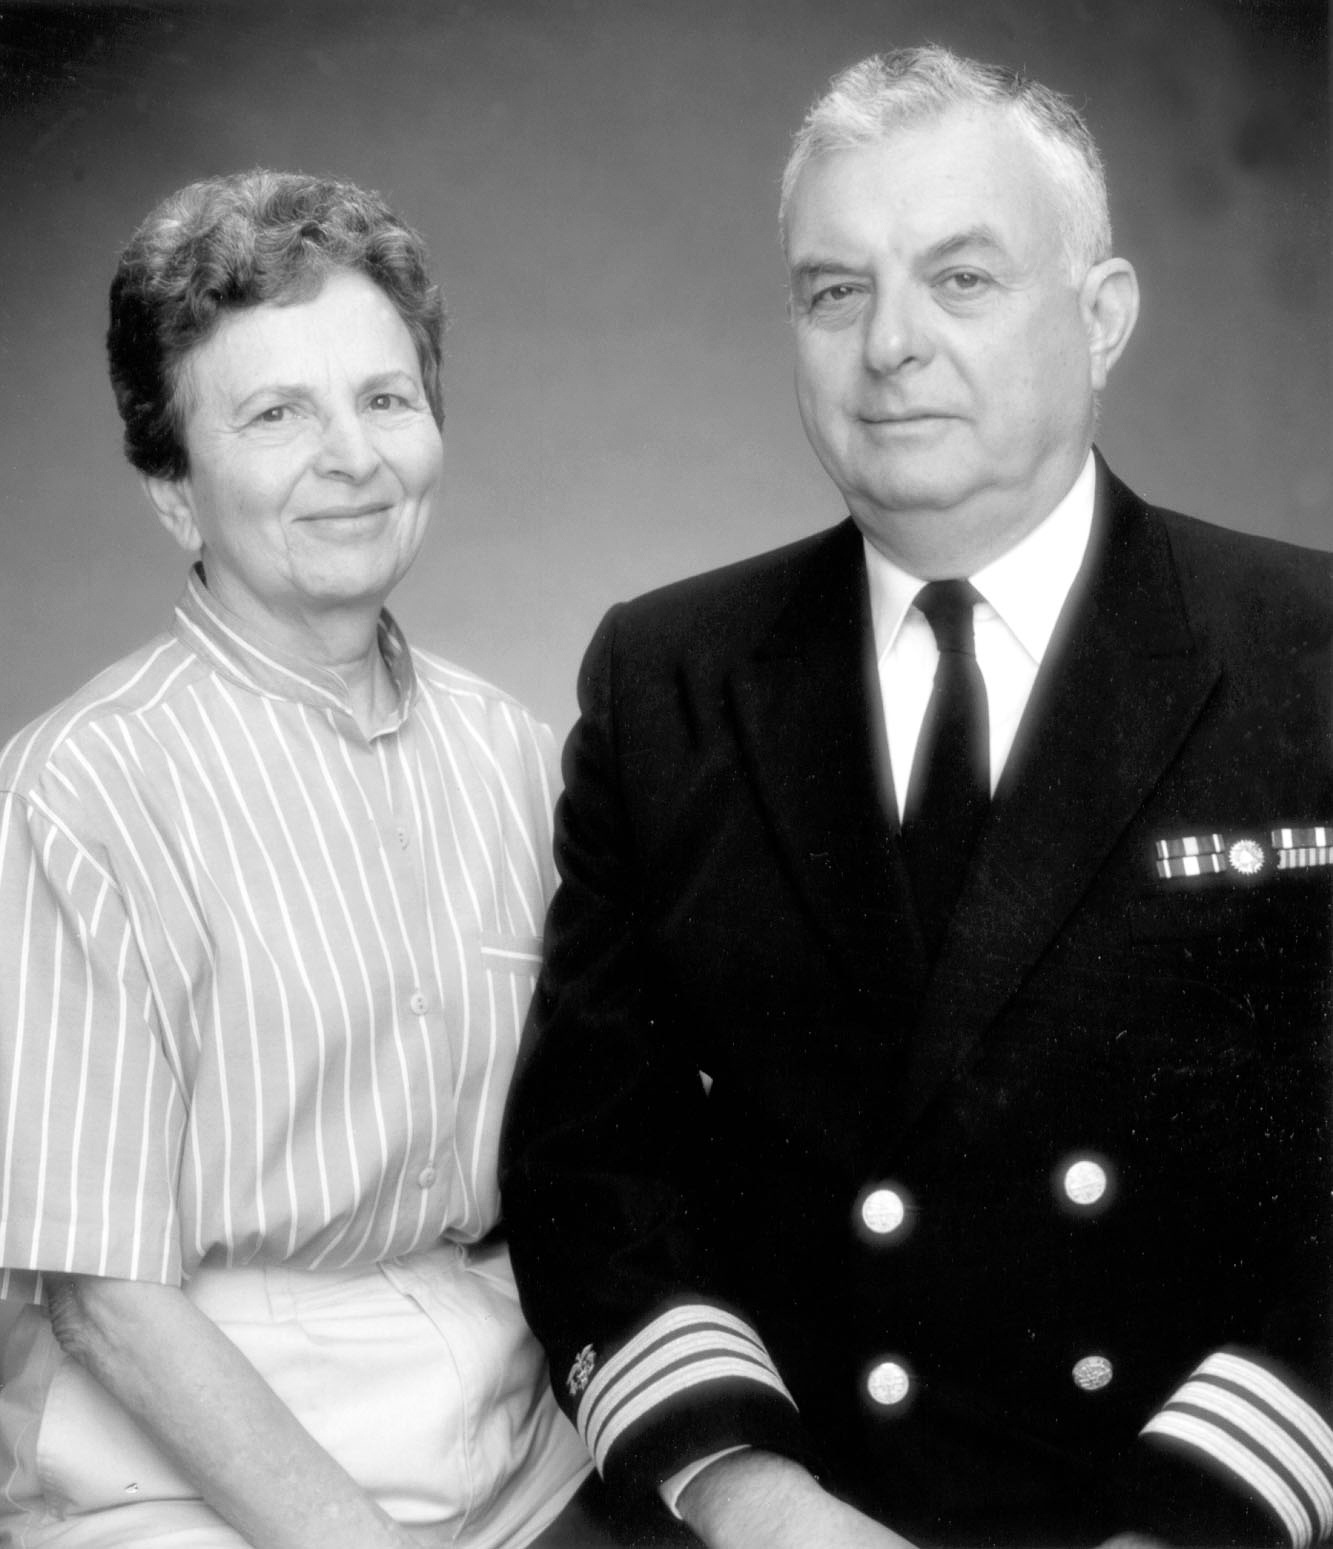 A photo of Dr. Rachel Schneerson and Dr. John Robbins, part of a photo shoot for their Lasker Award. She wears a striped shirt, he wears his Public Health Service uniform